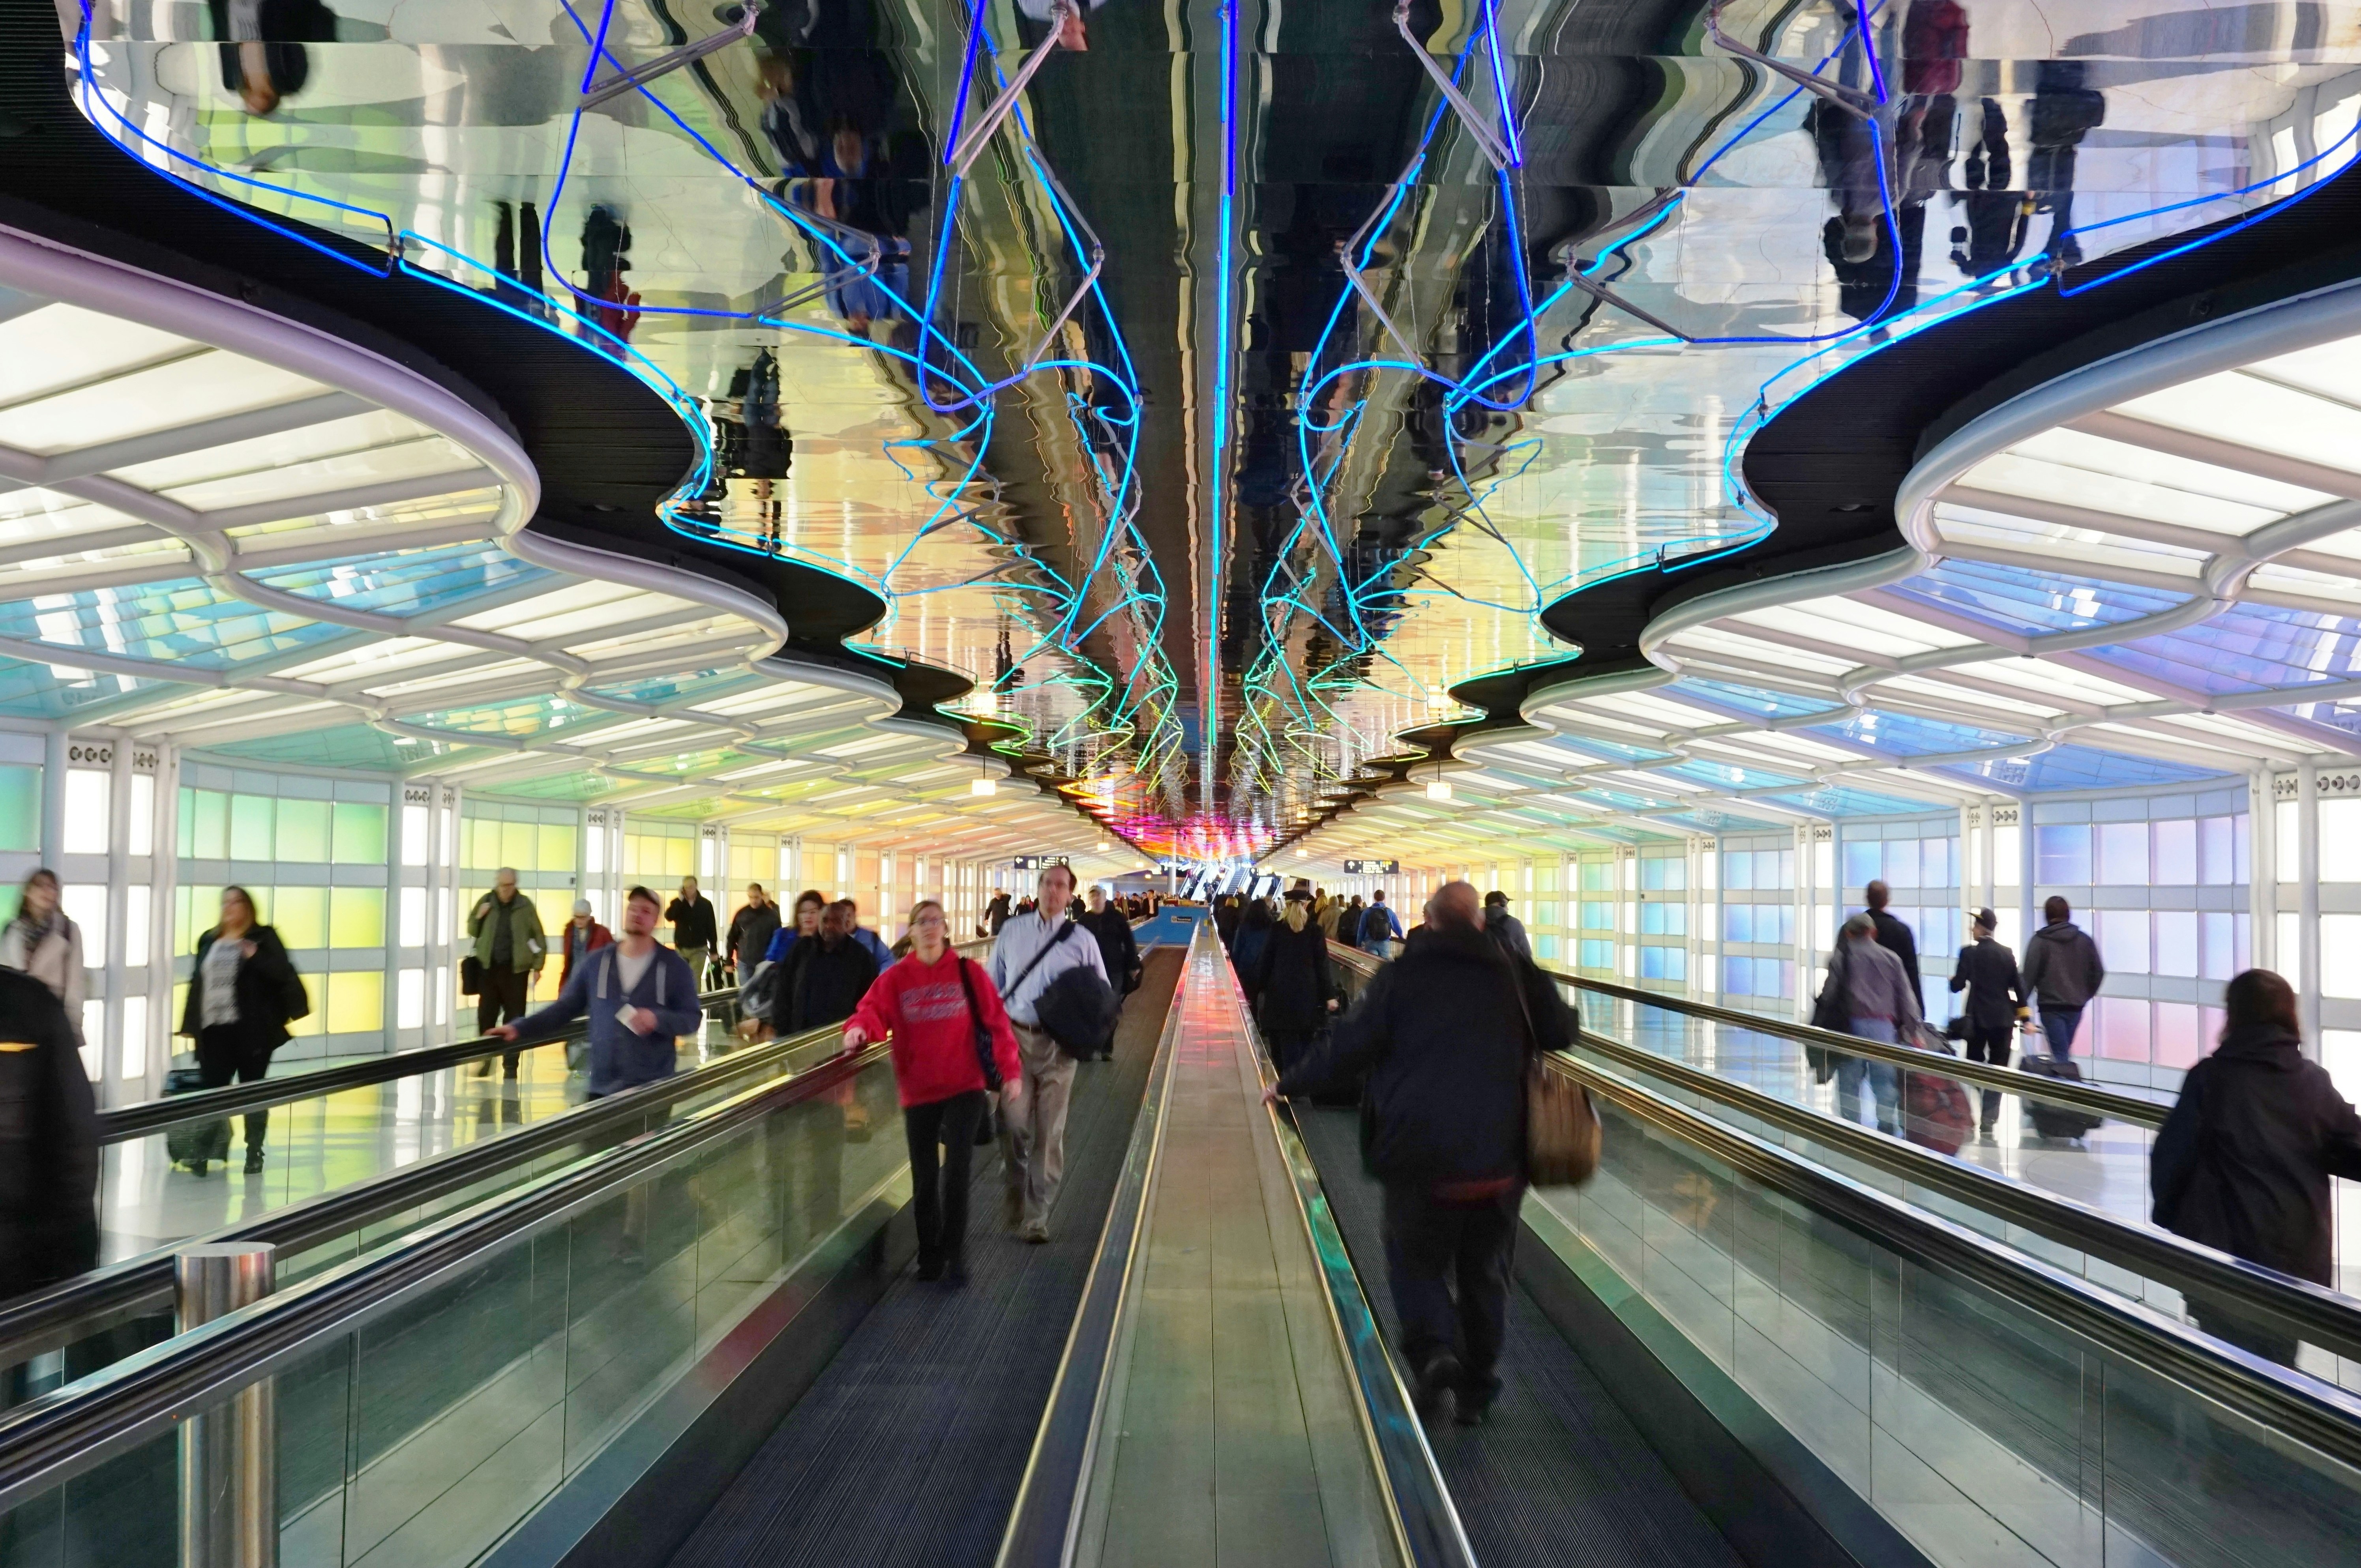 The colored electric neon tunnel The Sky Is the Limit at Chicago O'Hare International Airport (ORD) connects the B and C concourses at the United Airlines (UA) terminal.